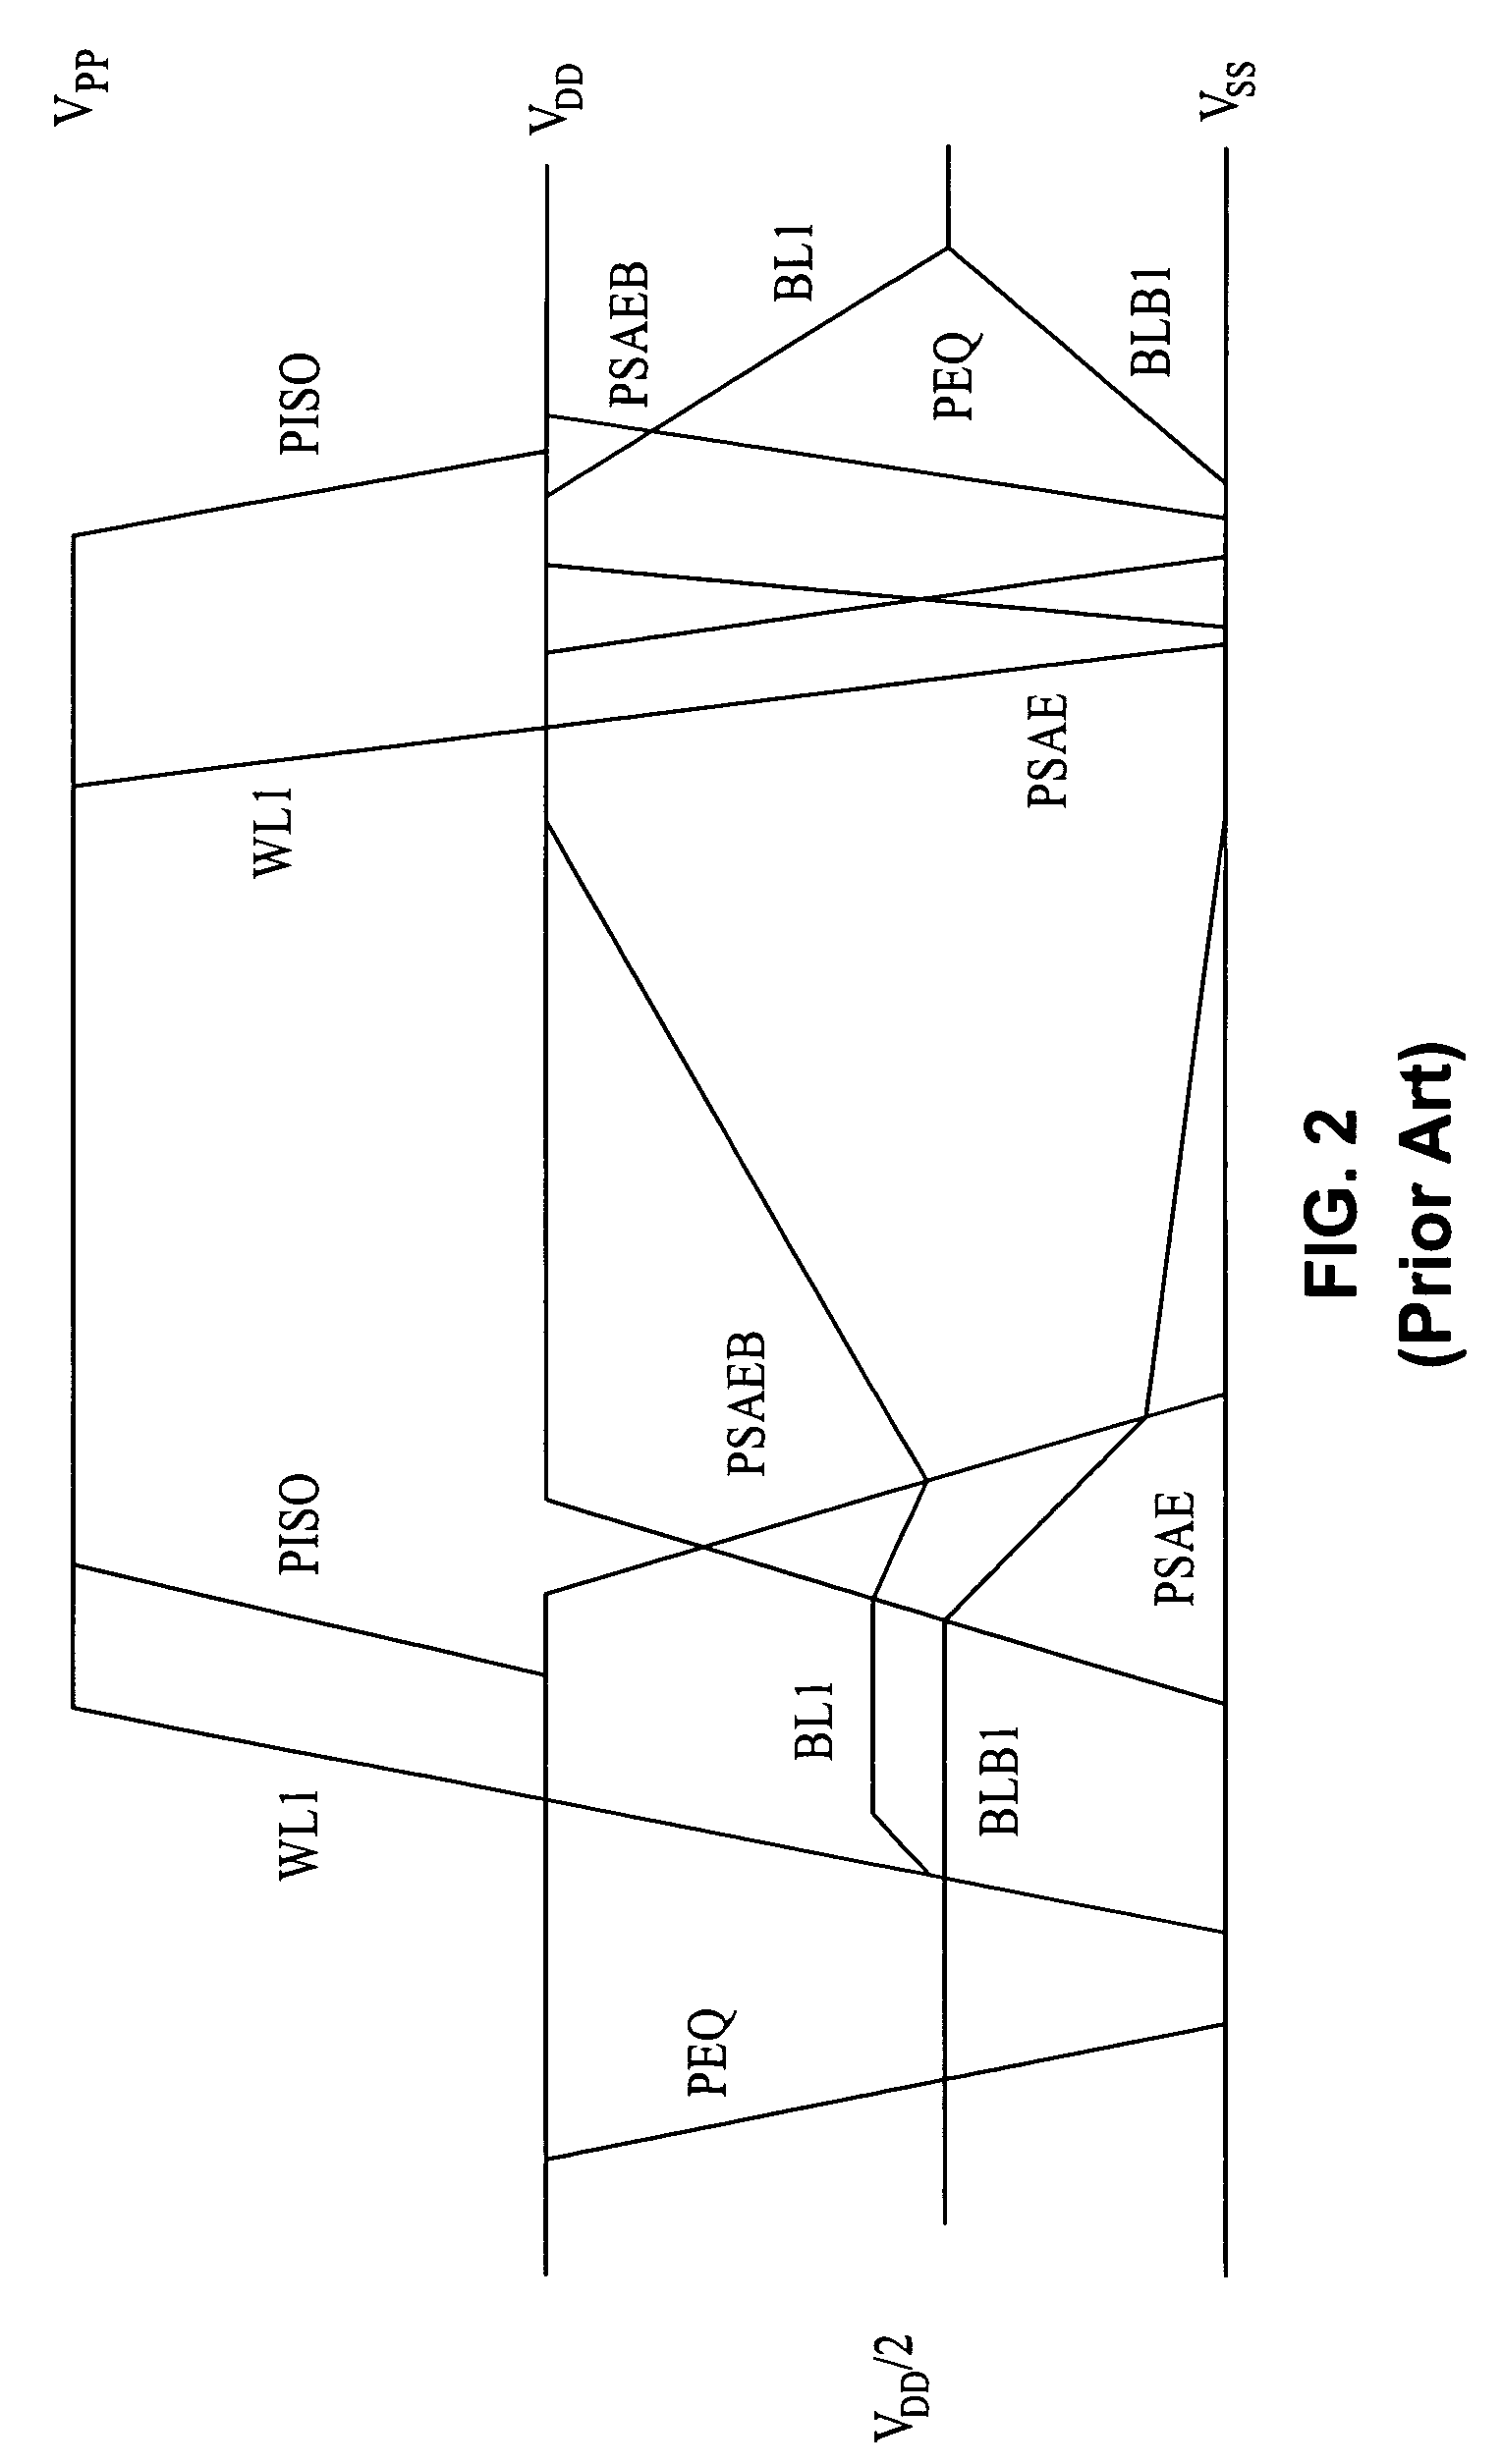 Low voltage operation DRAM control circuits